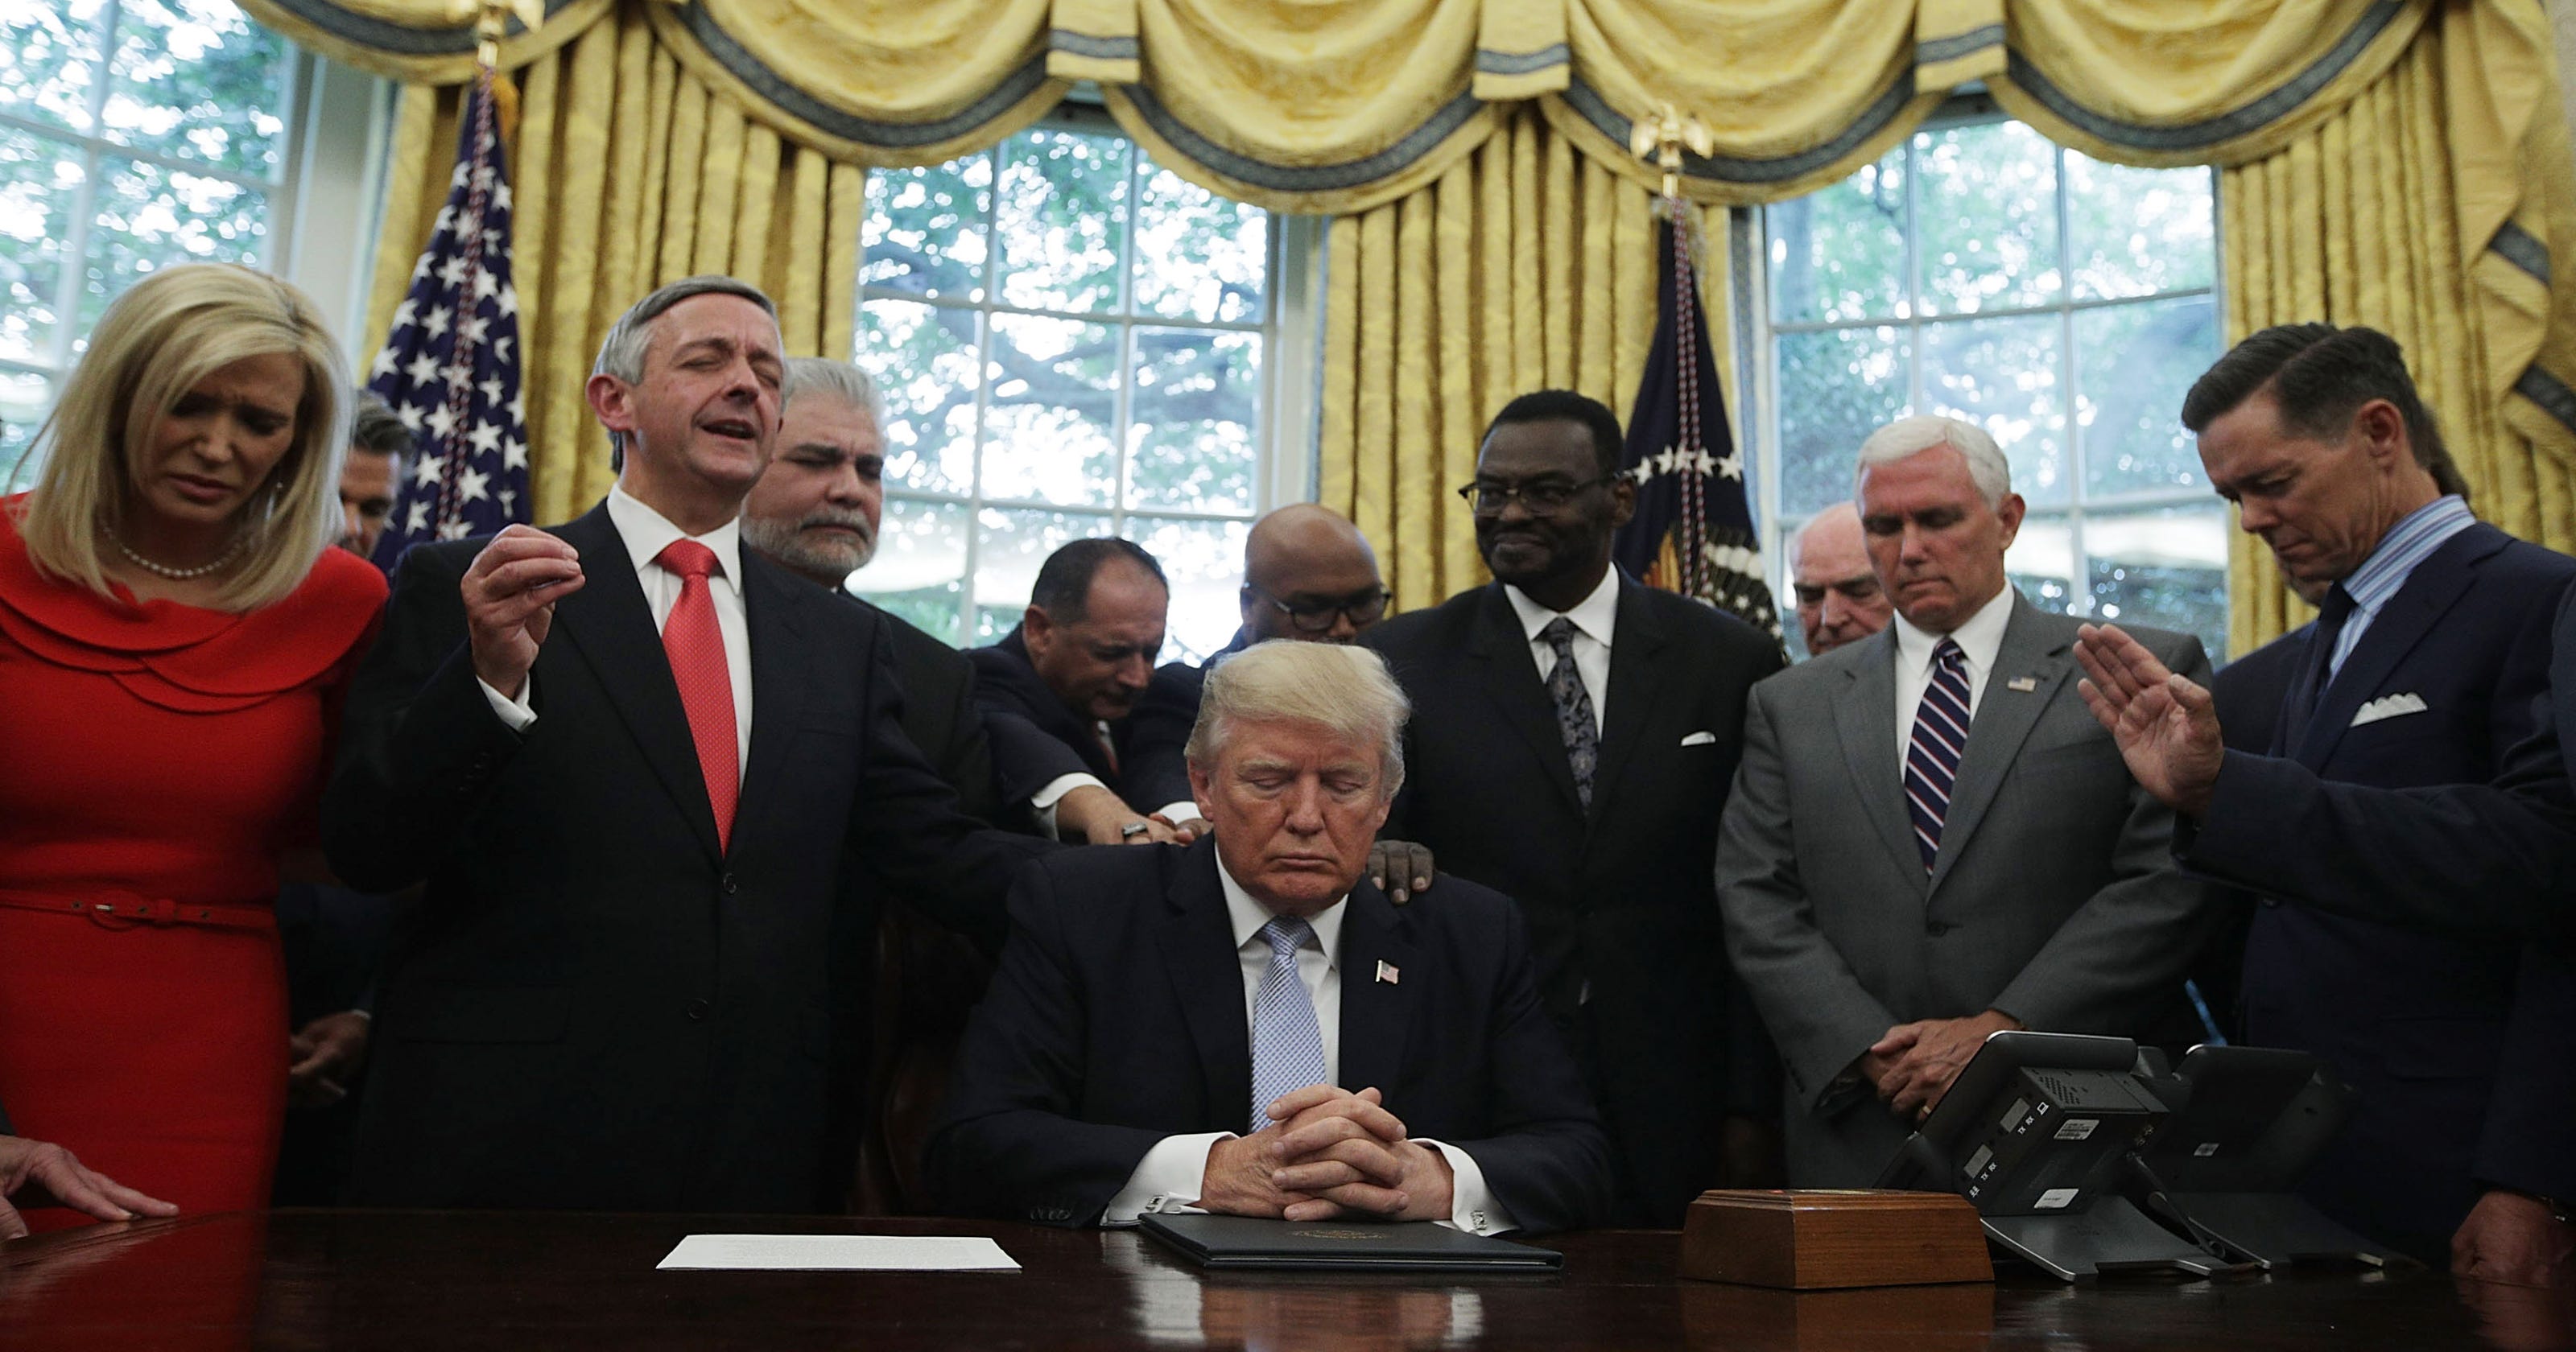 All The Presidents Clergymen A Close Look At Trumps Ties With Evangelicals 